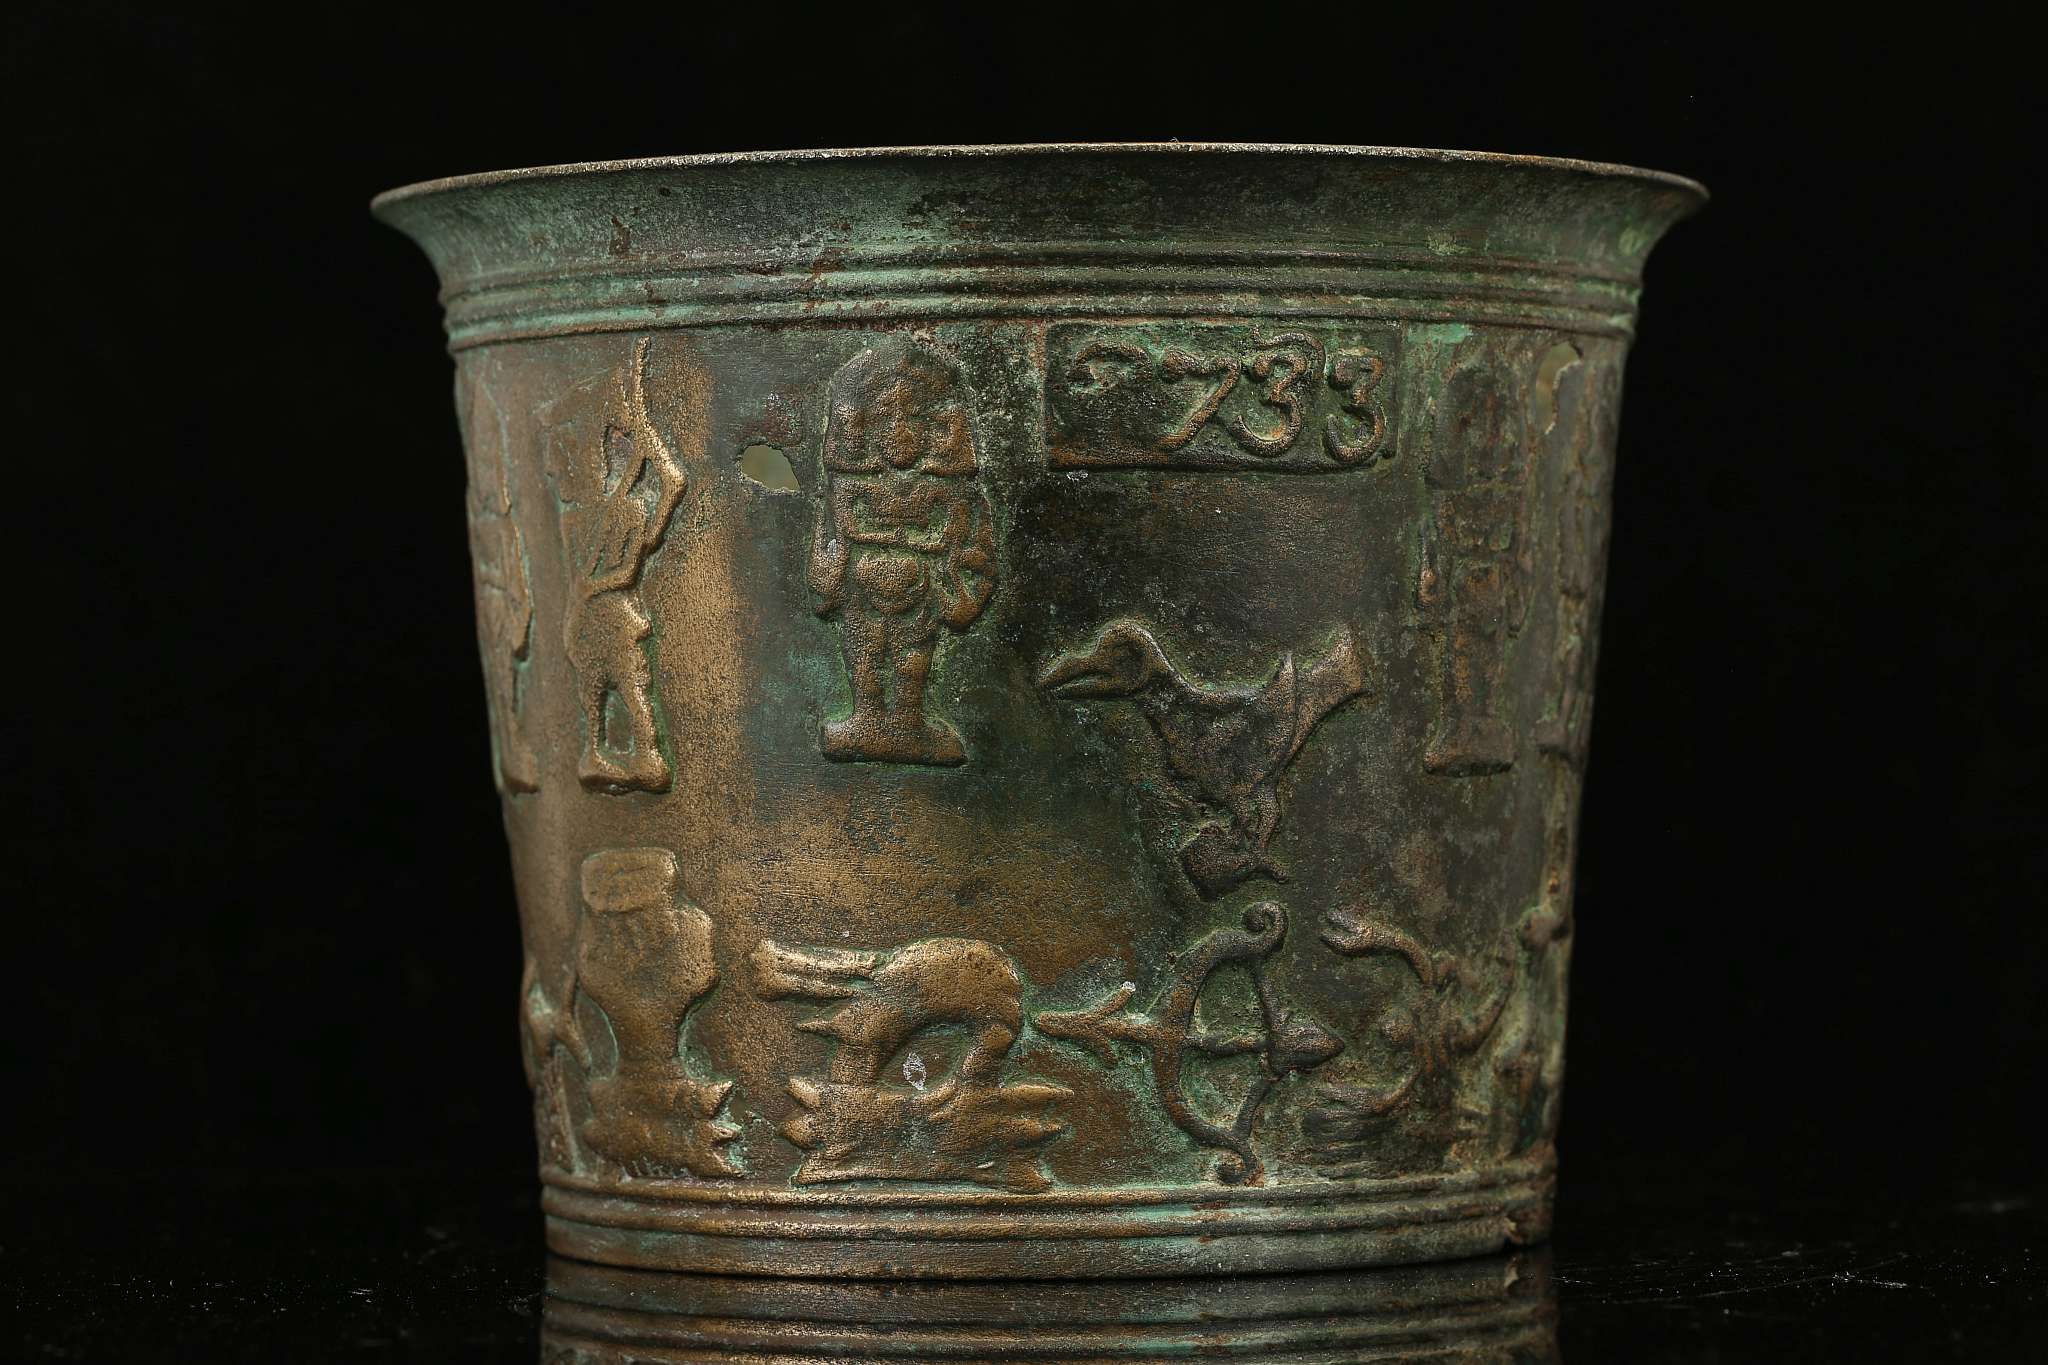 A JAVANESE BRONZE ZODIAC BOWL, INDONESIA Majapahit Period, circa 14th-15th Century A.D. Decorated in - Image 5 of 6